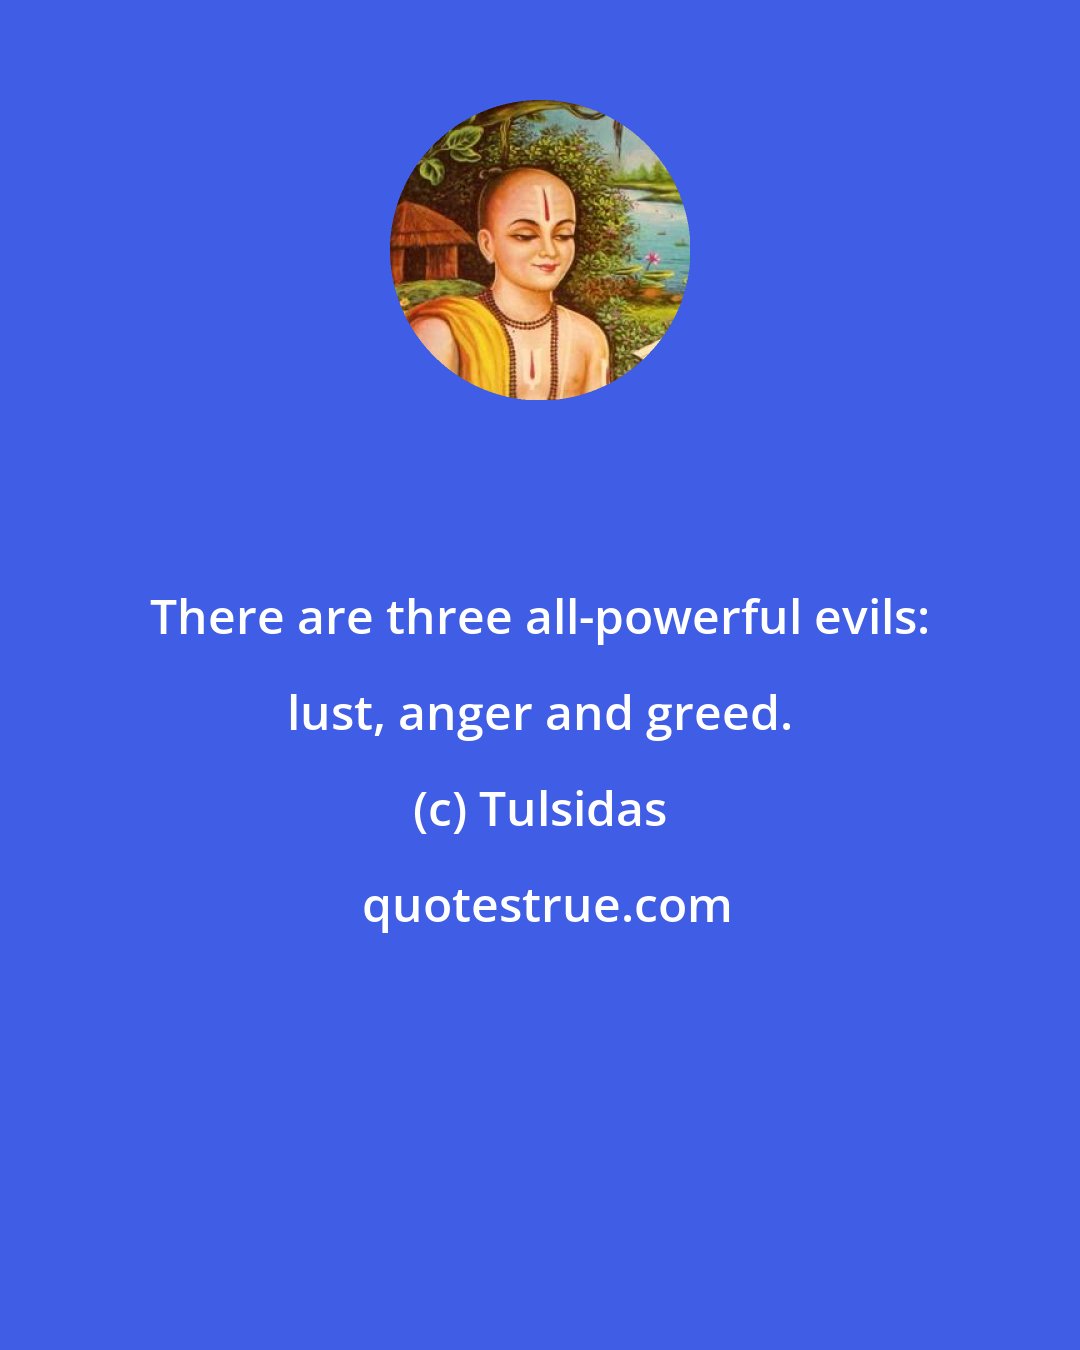 Tulsidas: There are three all-powerful evils: lust, anger and greed.